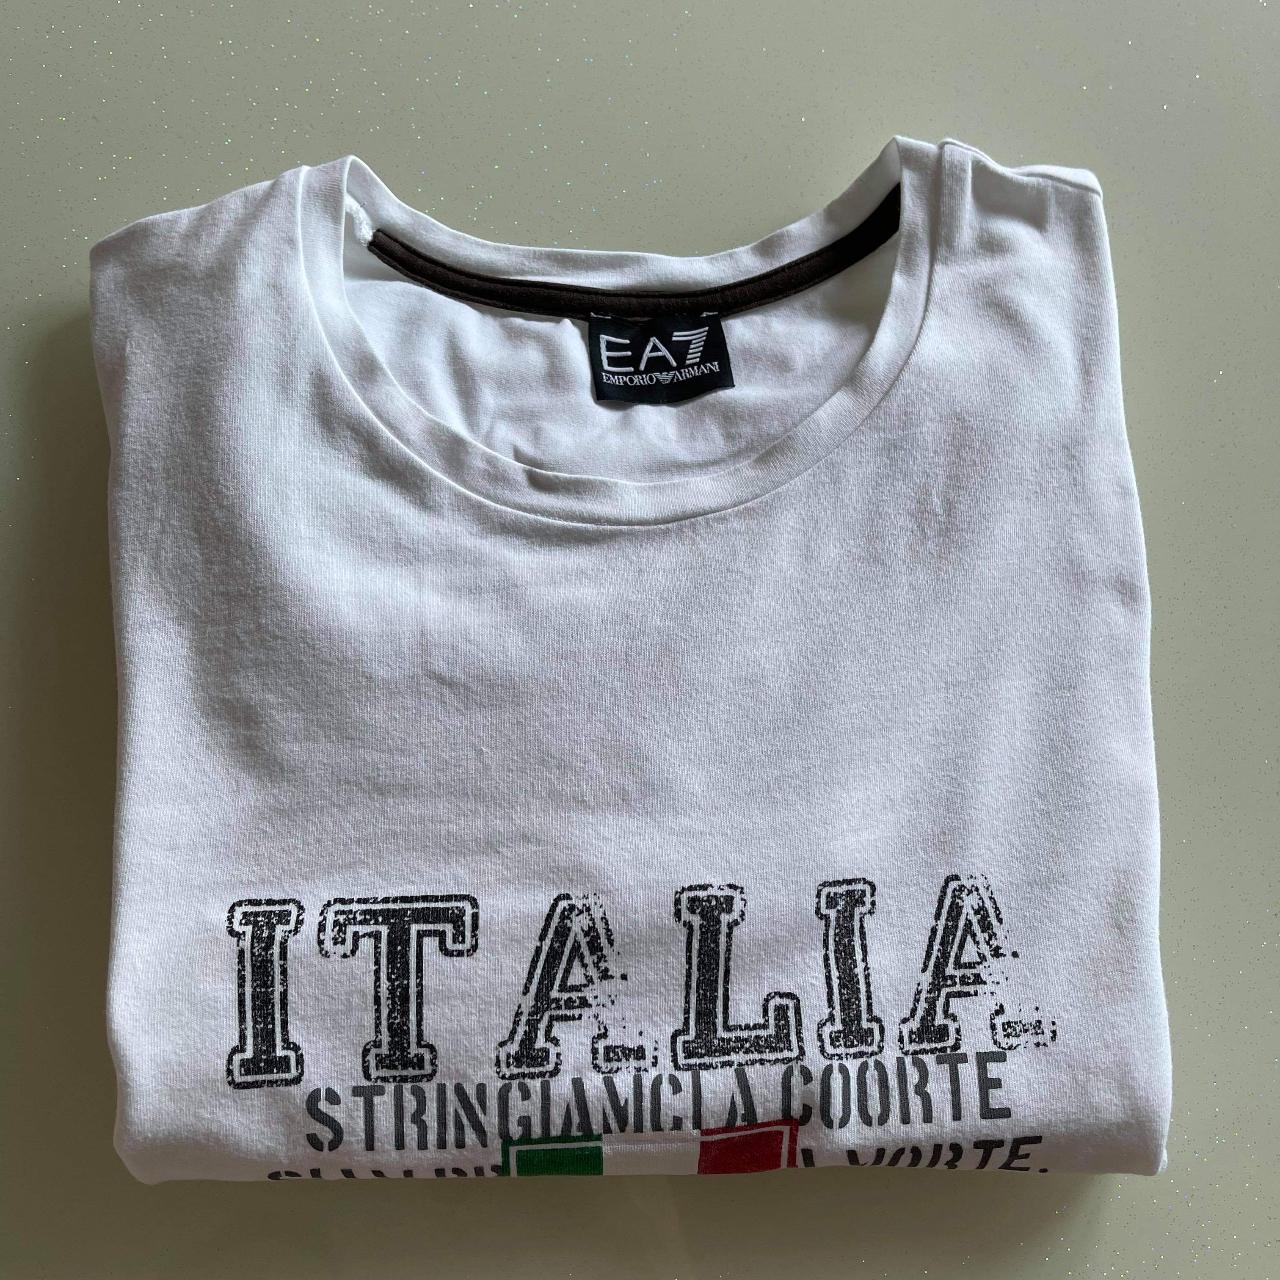 Purchased in Italy, worn a few times. Great - Depop